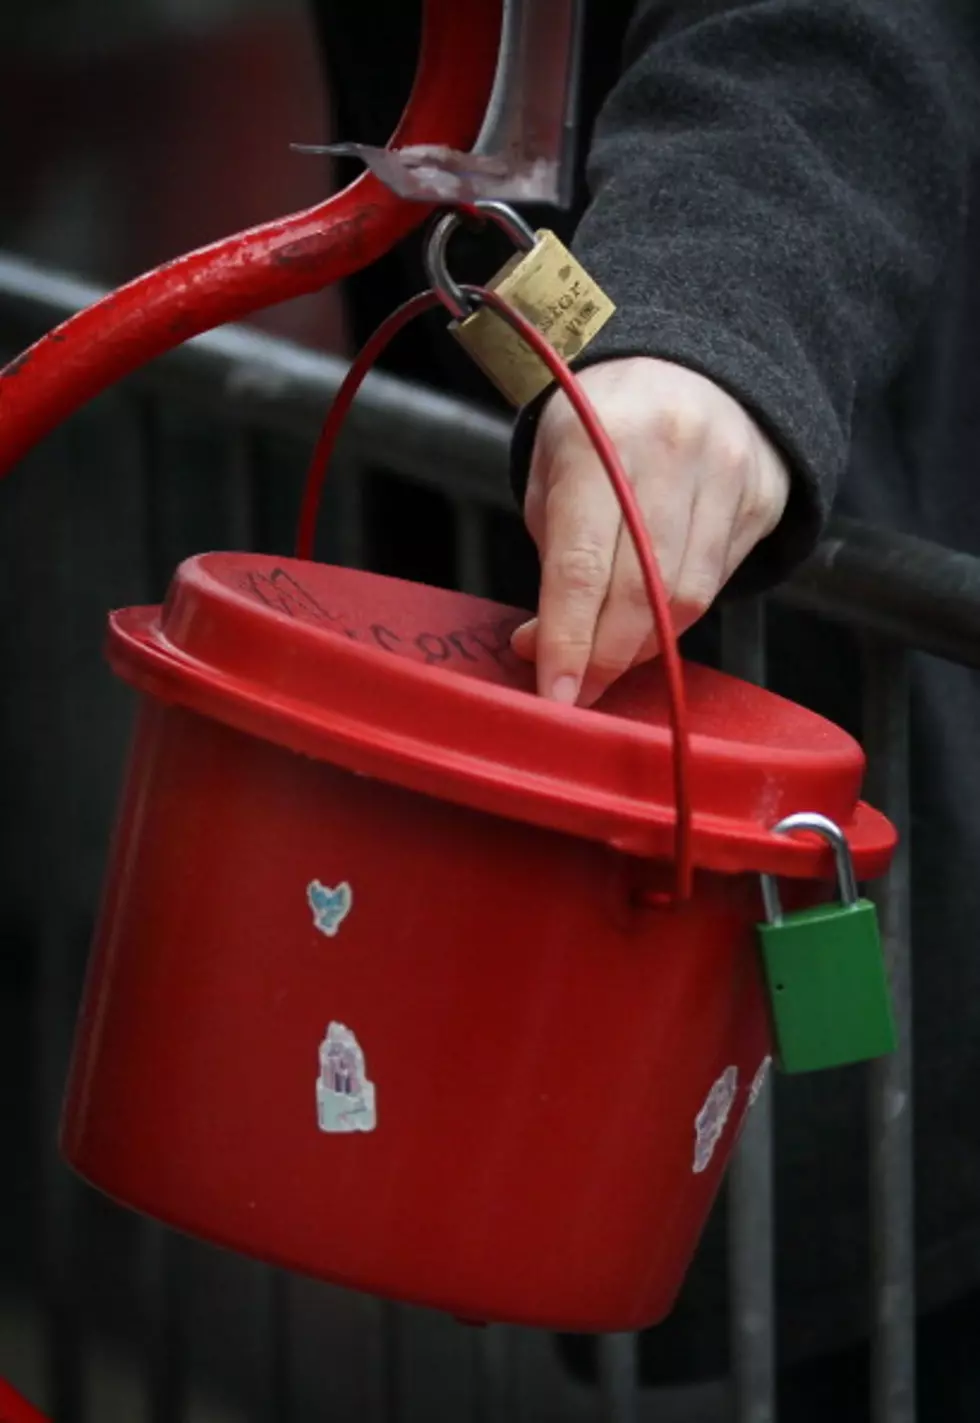 Help Make a Difference Through The Online Red Kettle Campaign